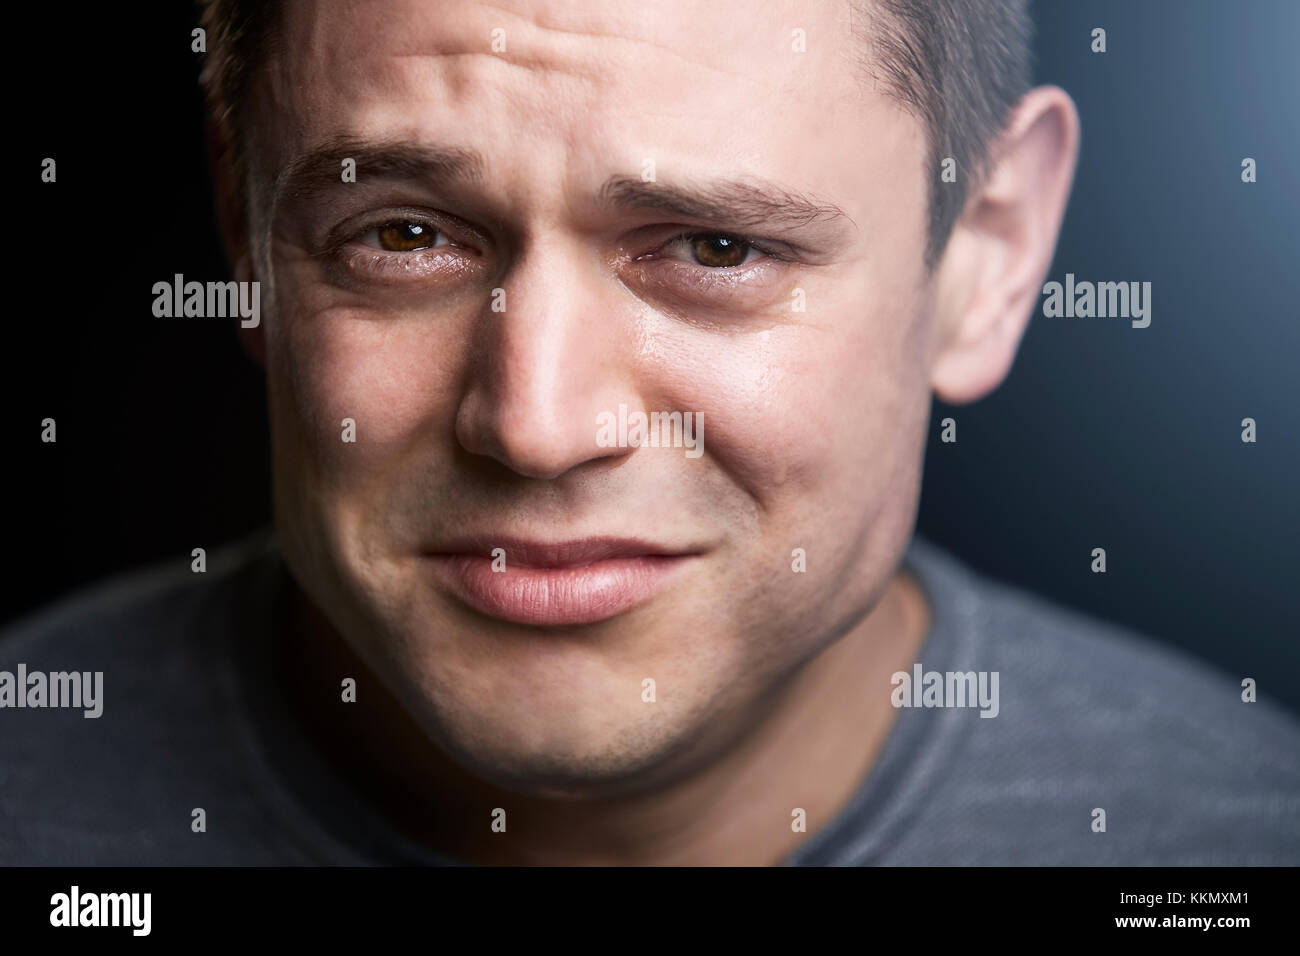 Close up portrait of upset young white man looking to camera Stock Photo